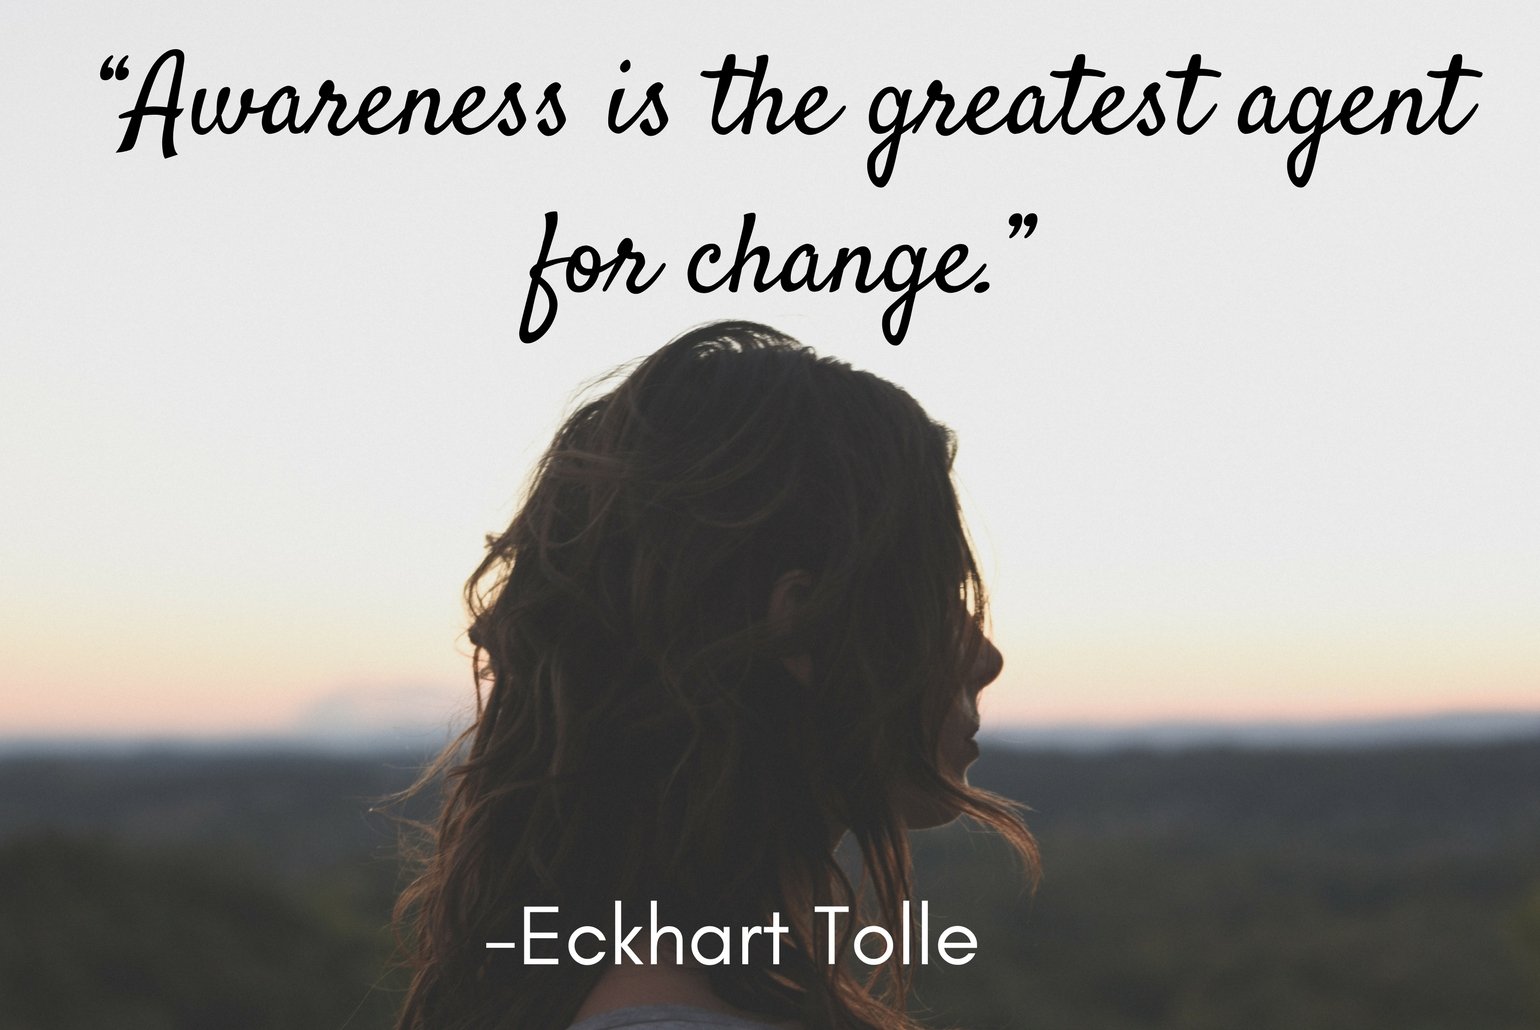 self-awareness, self-confidence, consciousness, self-help, personal development, self-awareness quote, eckhart tolle, awareness is the greatest agent for change